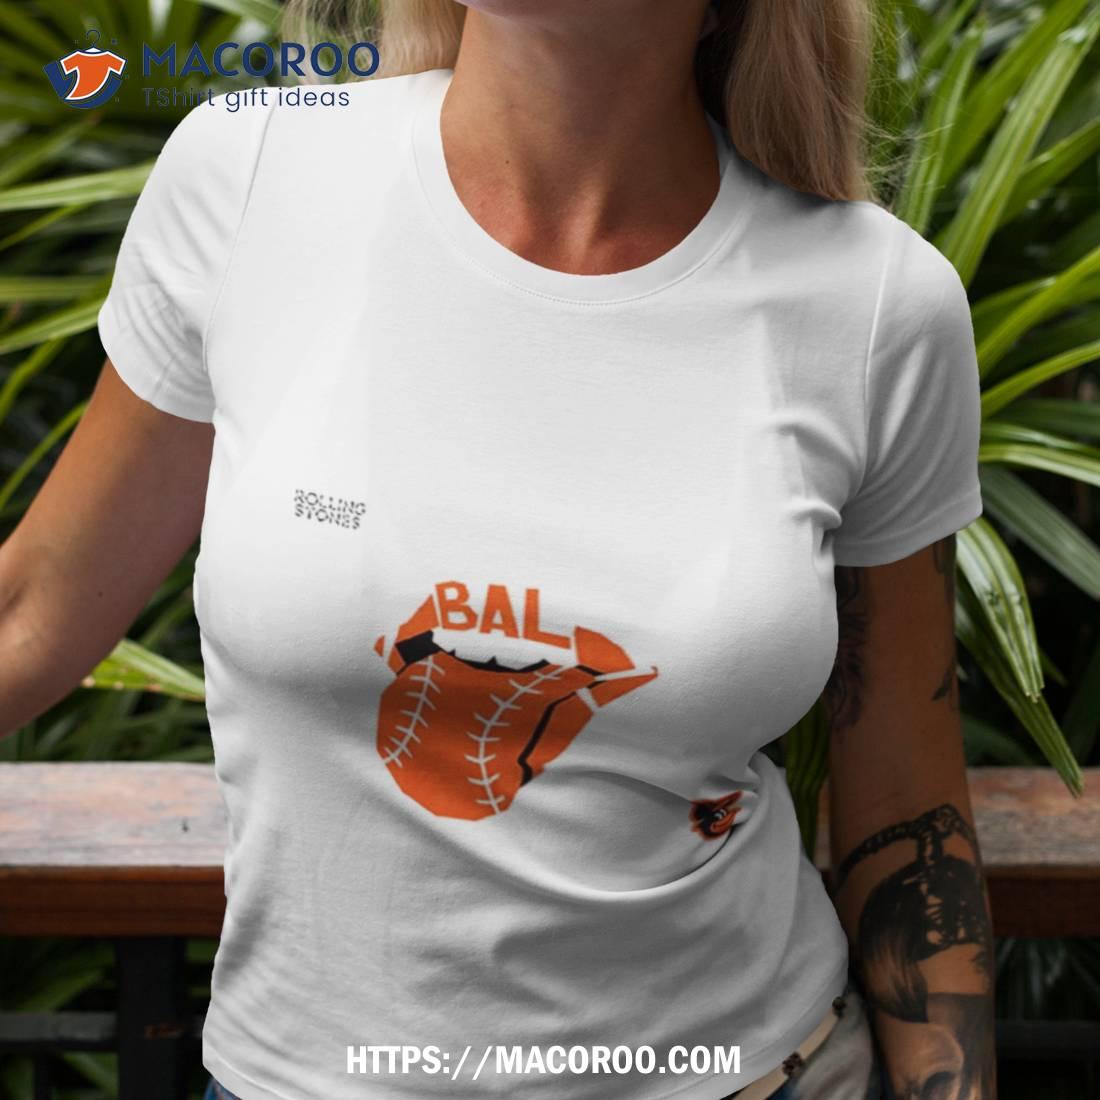 The Rolling Stones x Baltimore Orioles MLB Hackey Diamonds Limited Edition  Vinyl Collection Collab Shirt - Guineashirt Premium ™ LLC